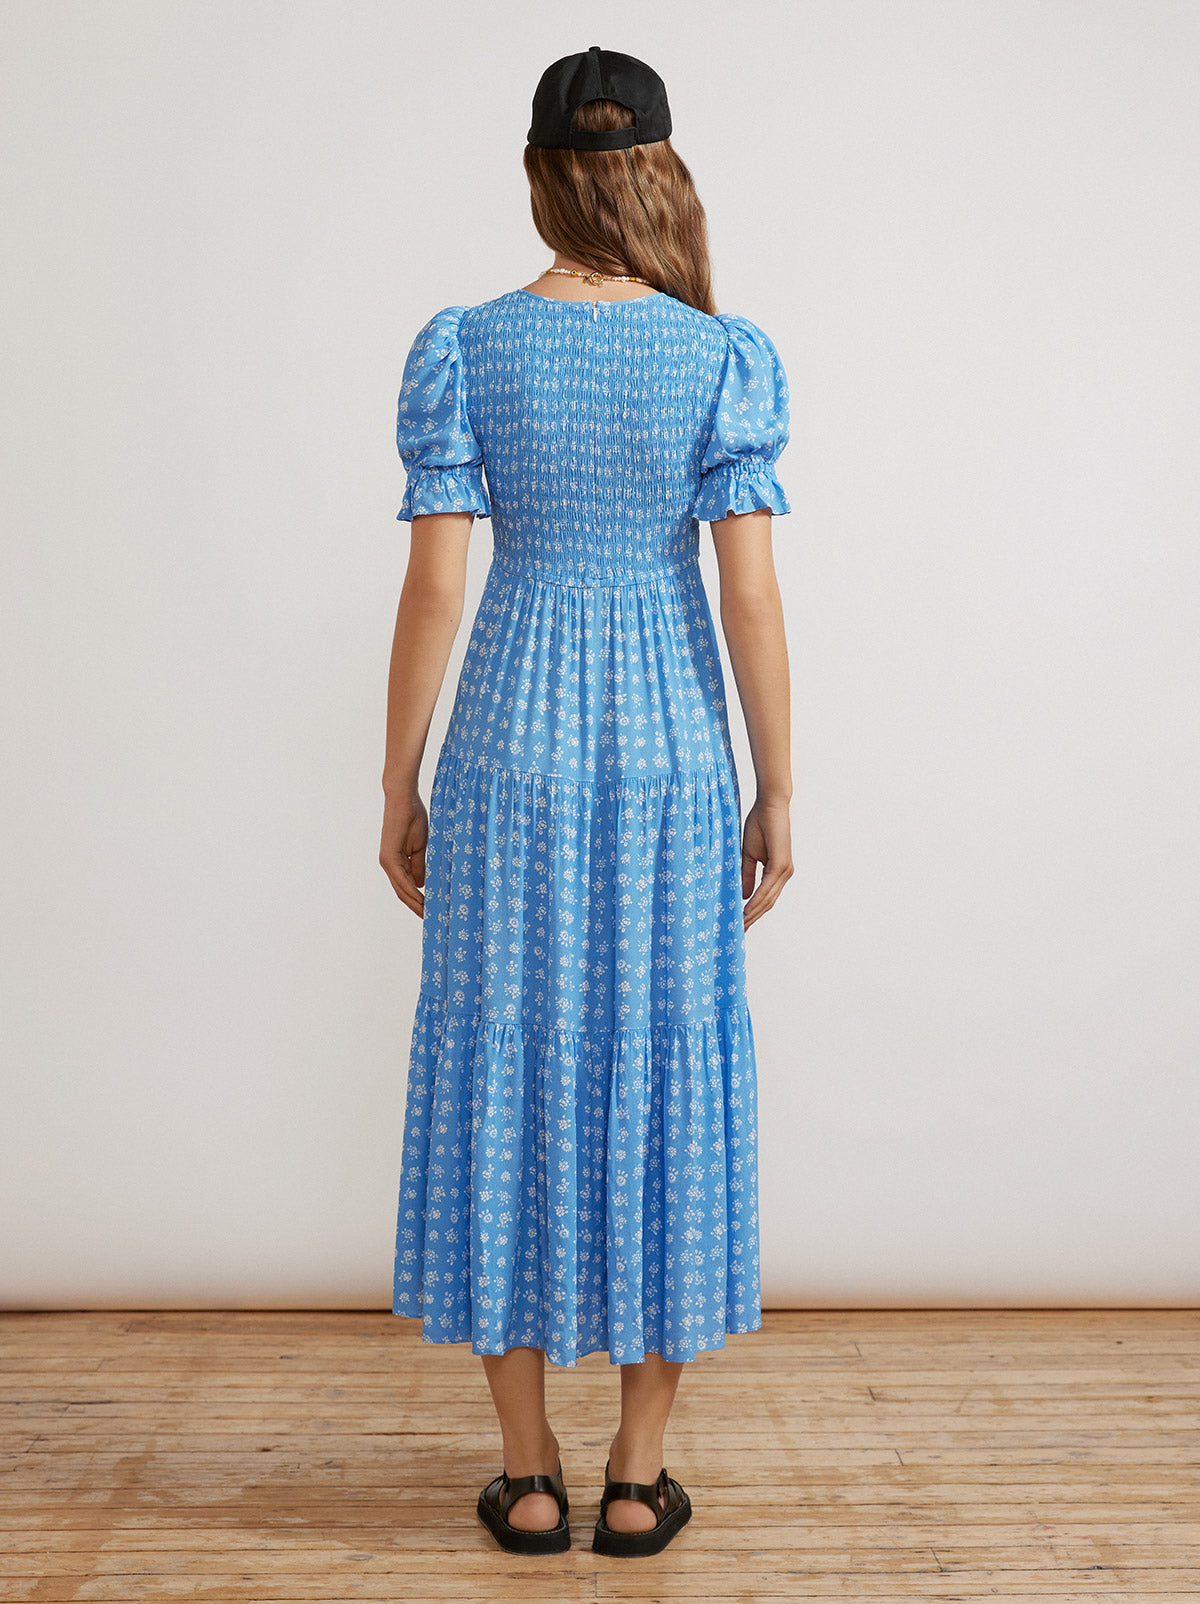 Persephone Shirred Blue Ditsy Floral Dress By KITRI Studio